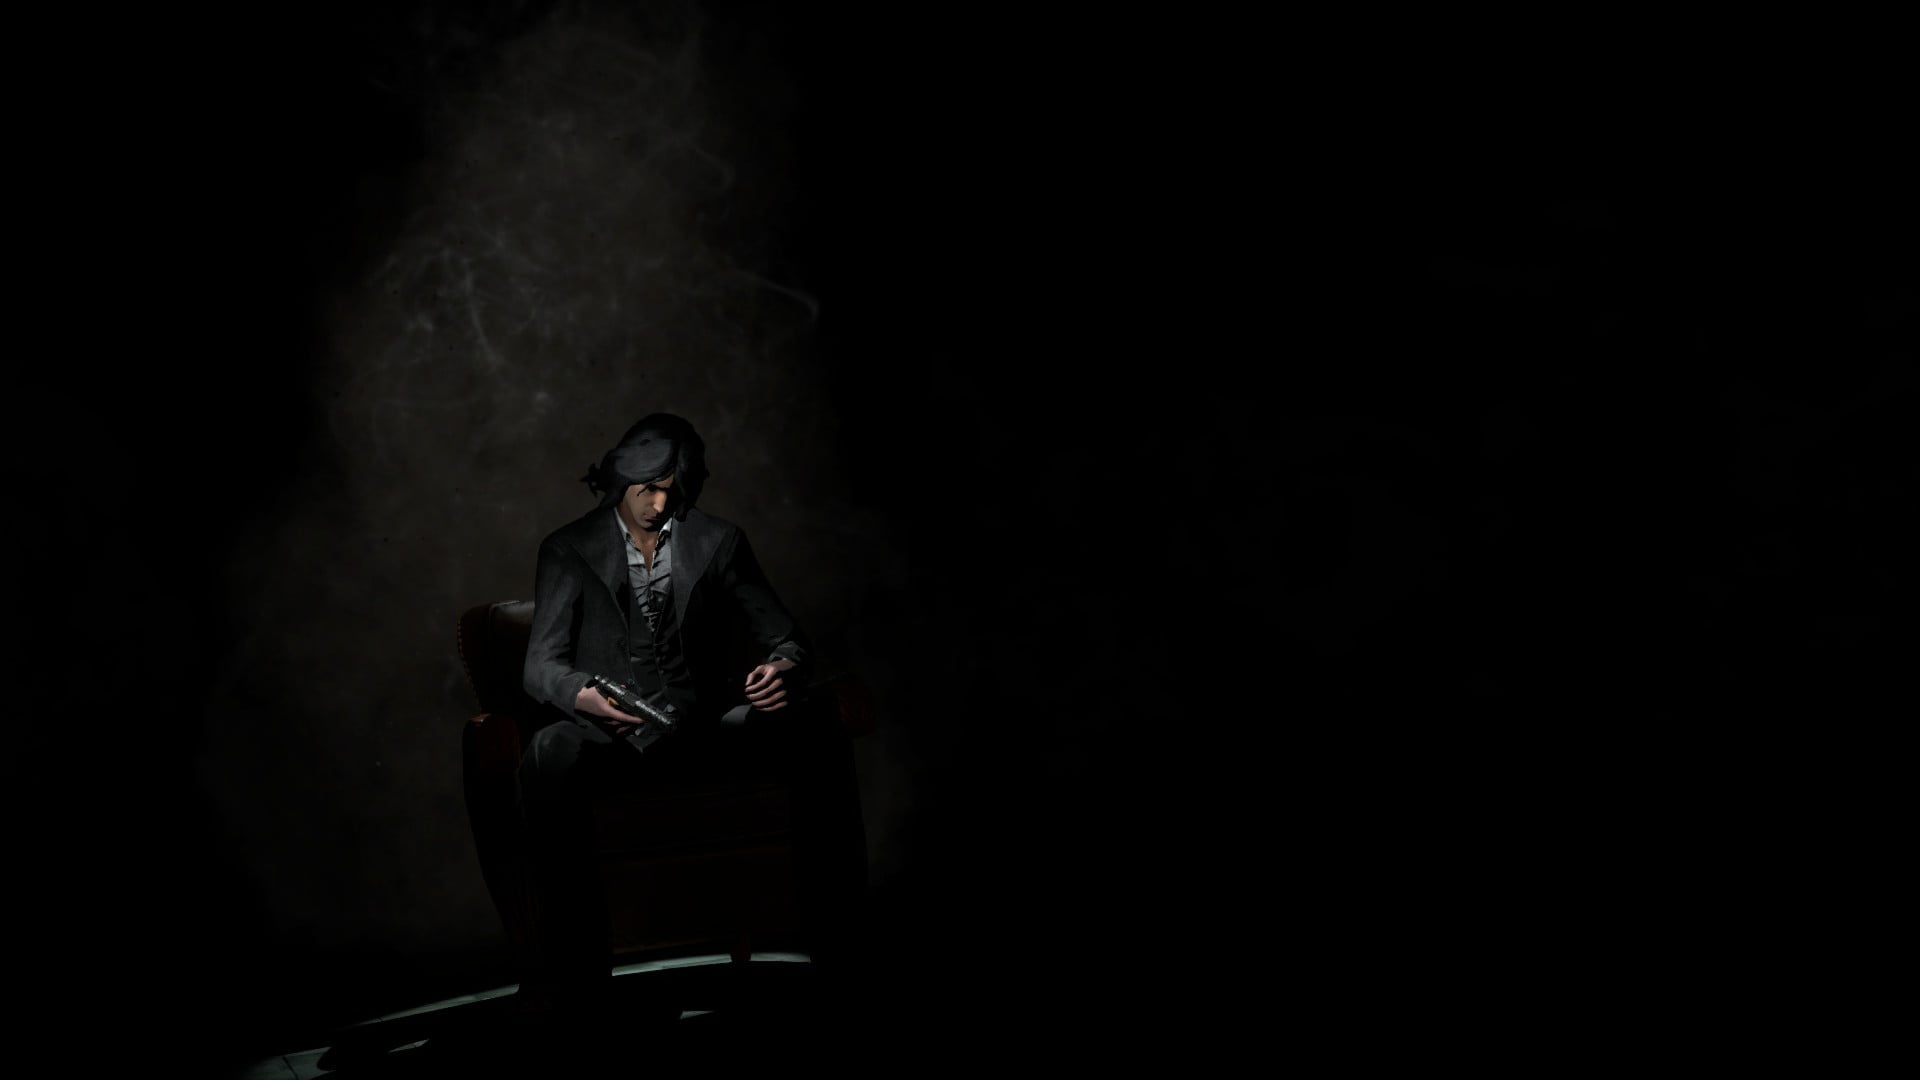 man sitting on chair holding gun illustration, The Darkness 2, the Darkness, black background, video games